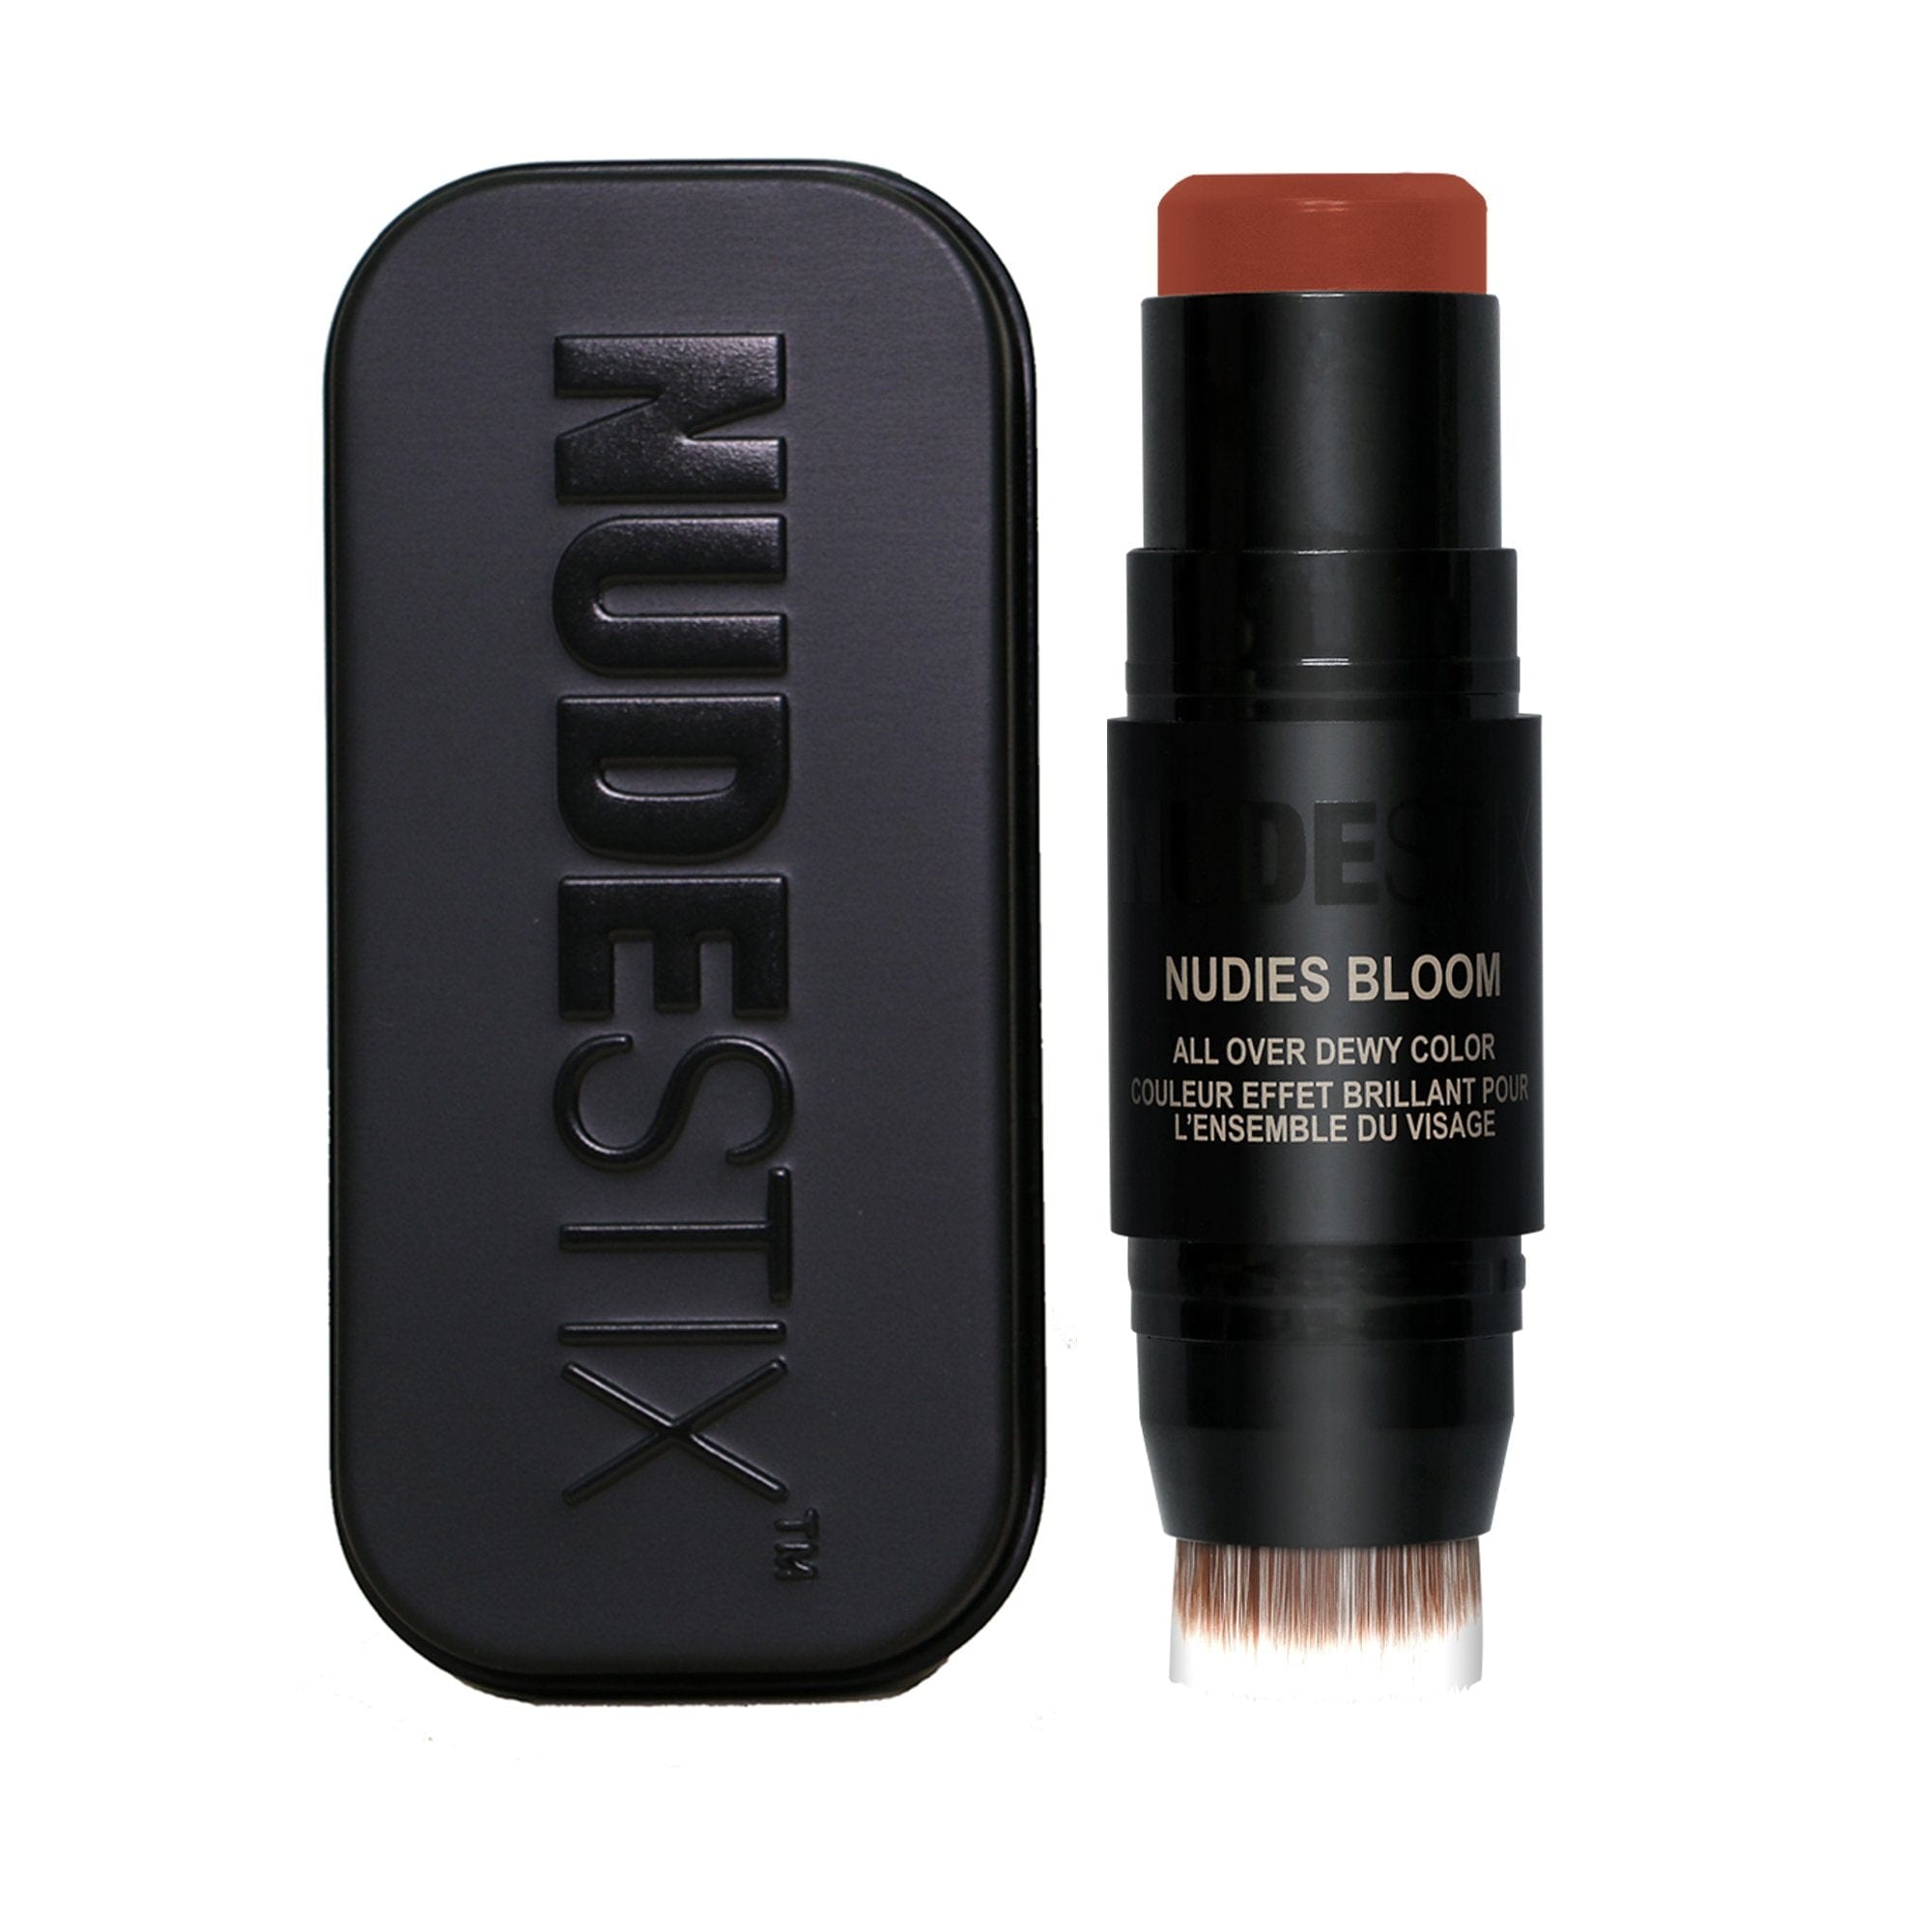 Nudies Bloom in shade Crimson Lover with Nudestix Can